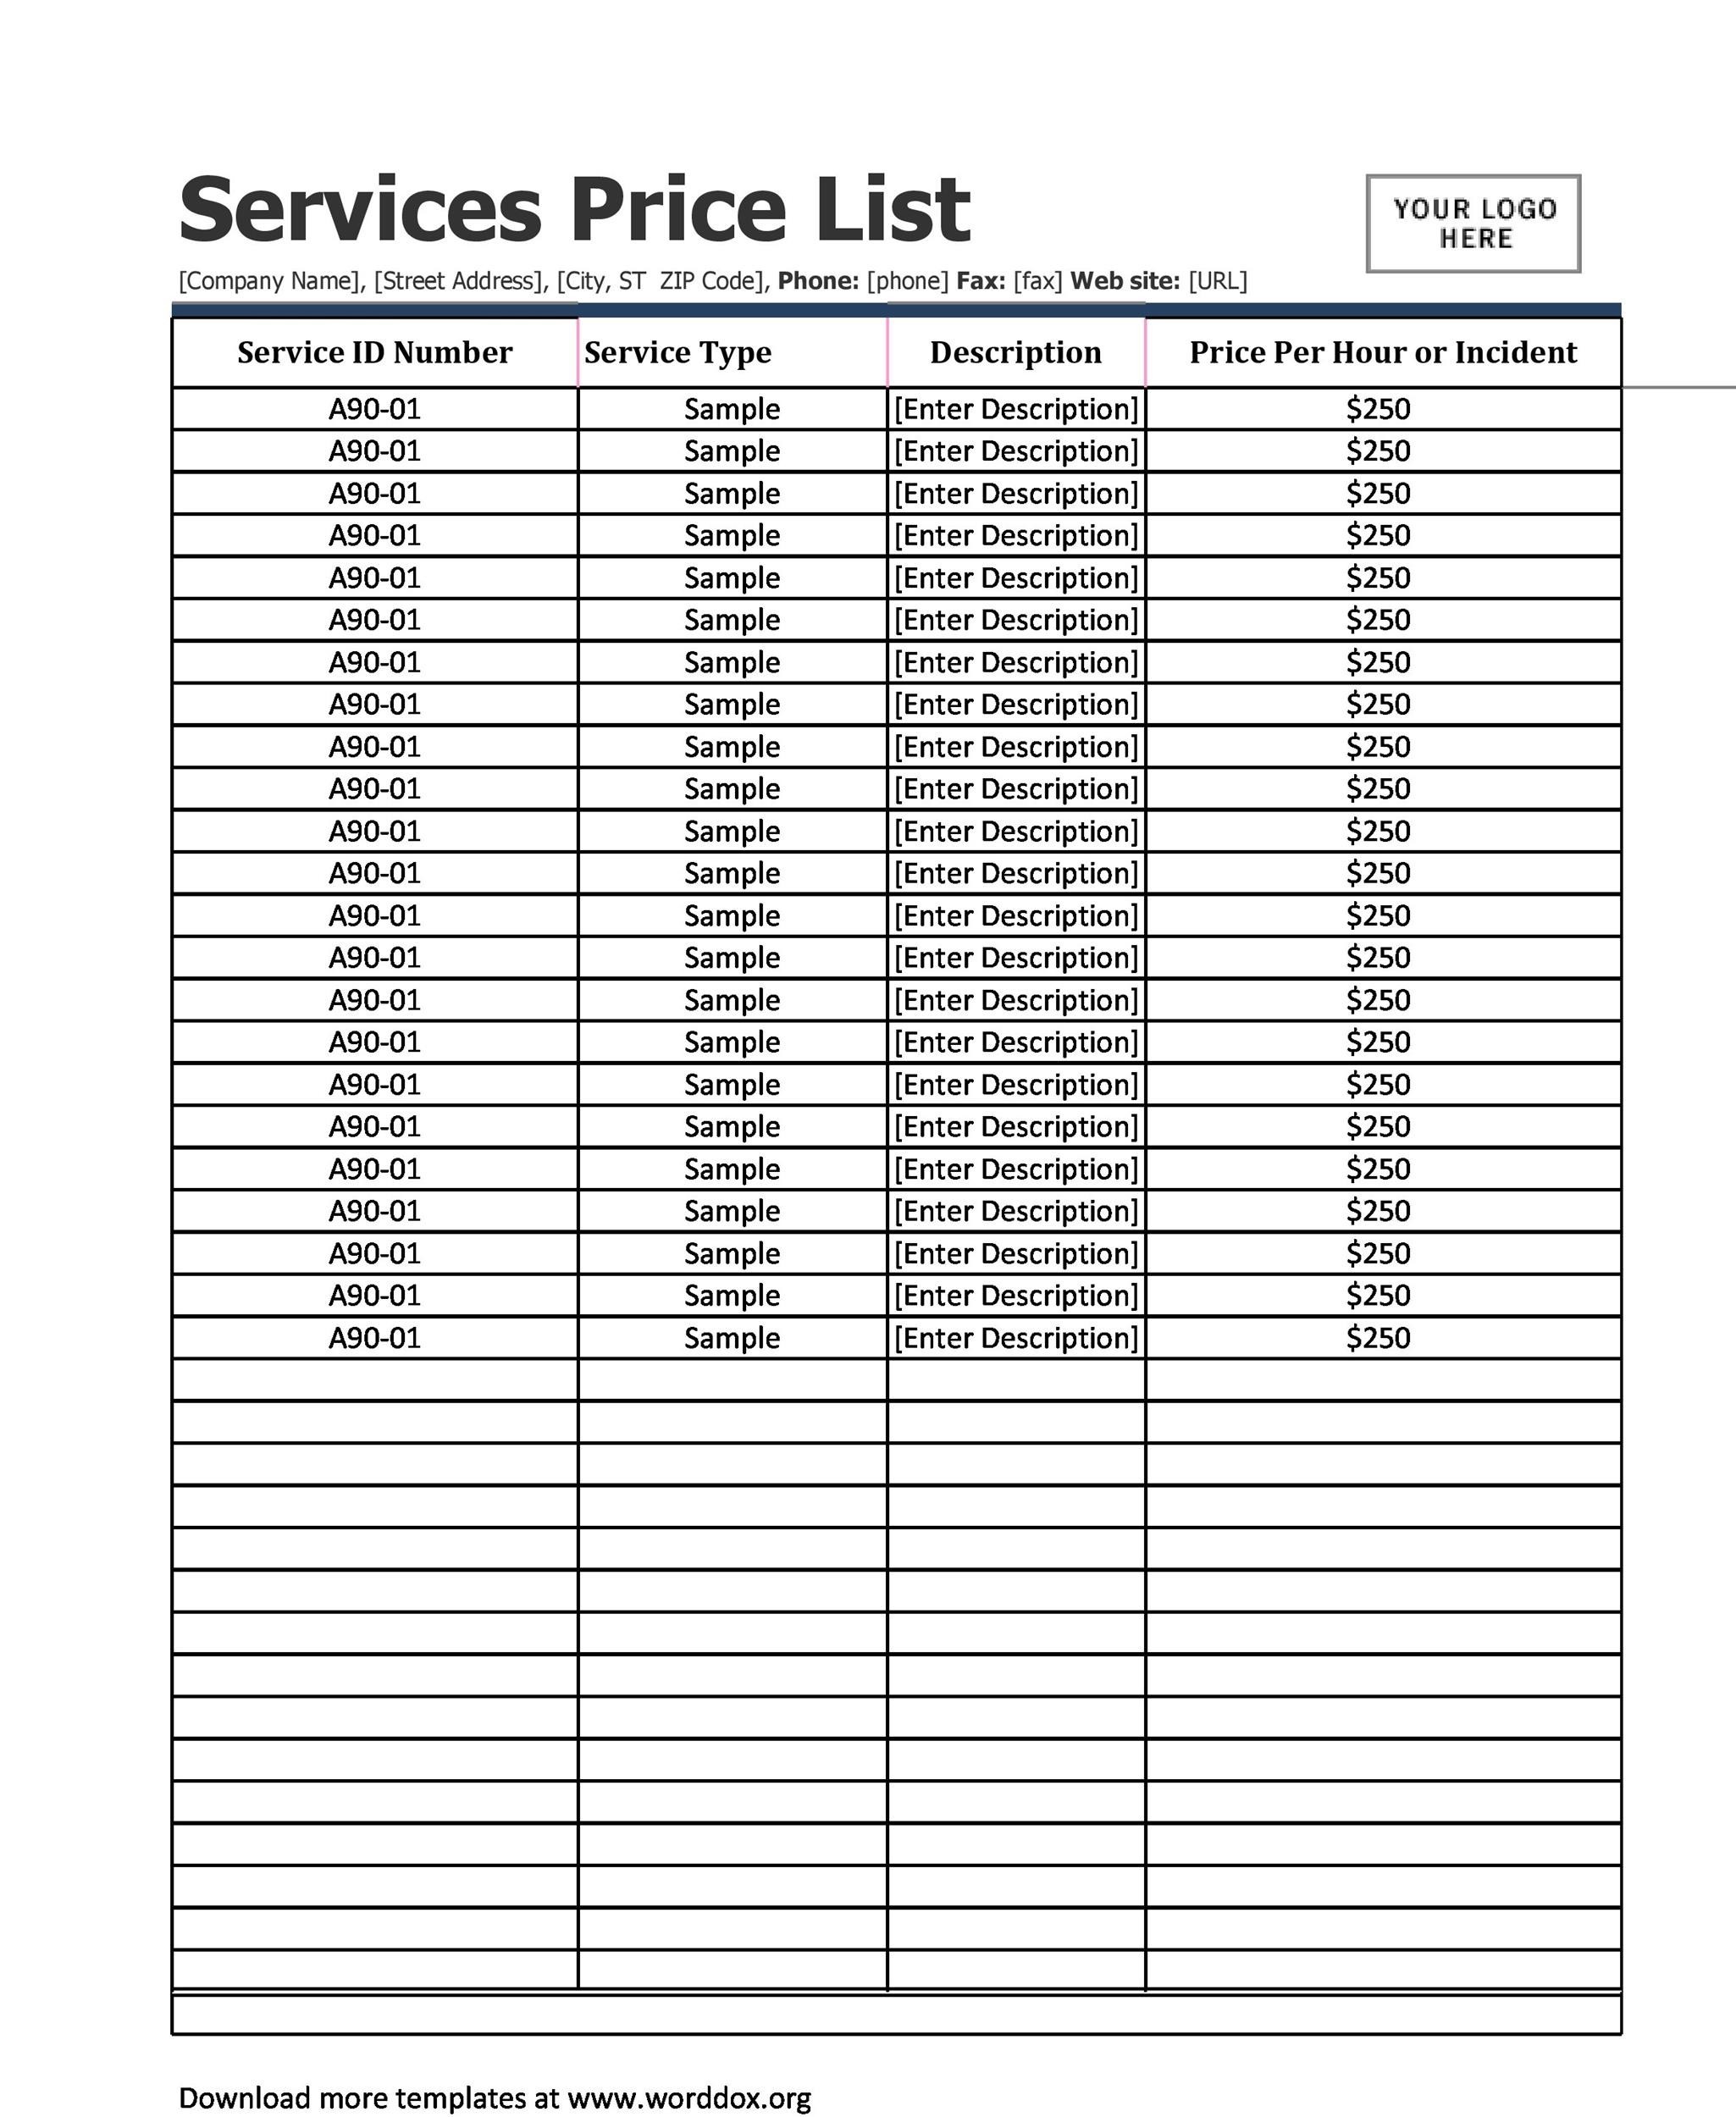 Pricing Chart Template - Pricing Table Chart Price Plans Checklist Prices P...